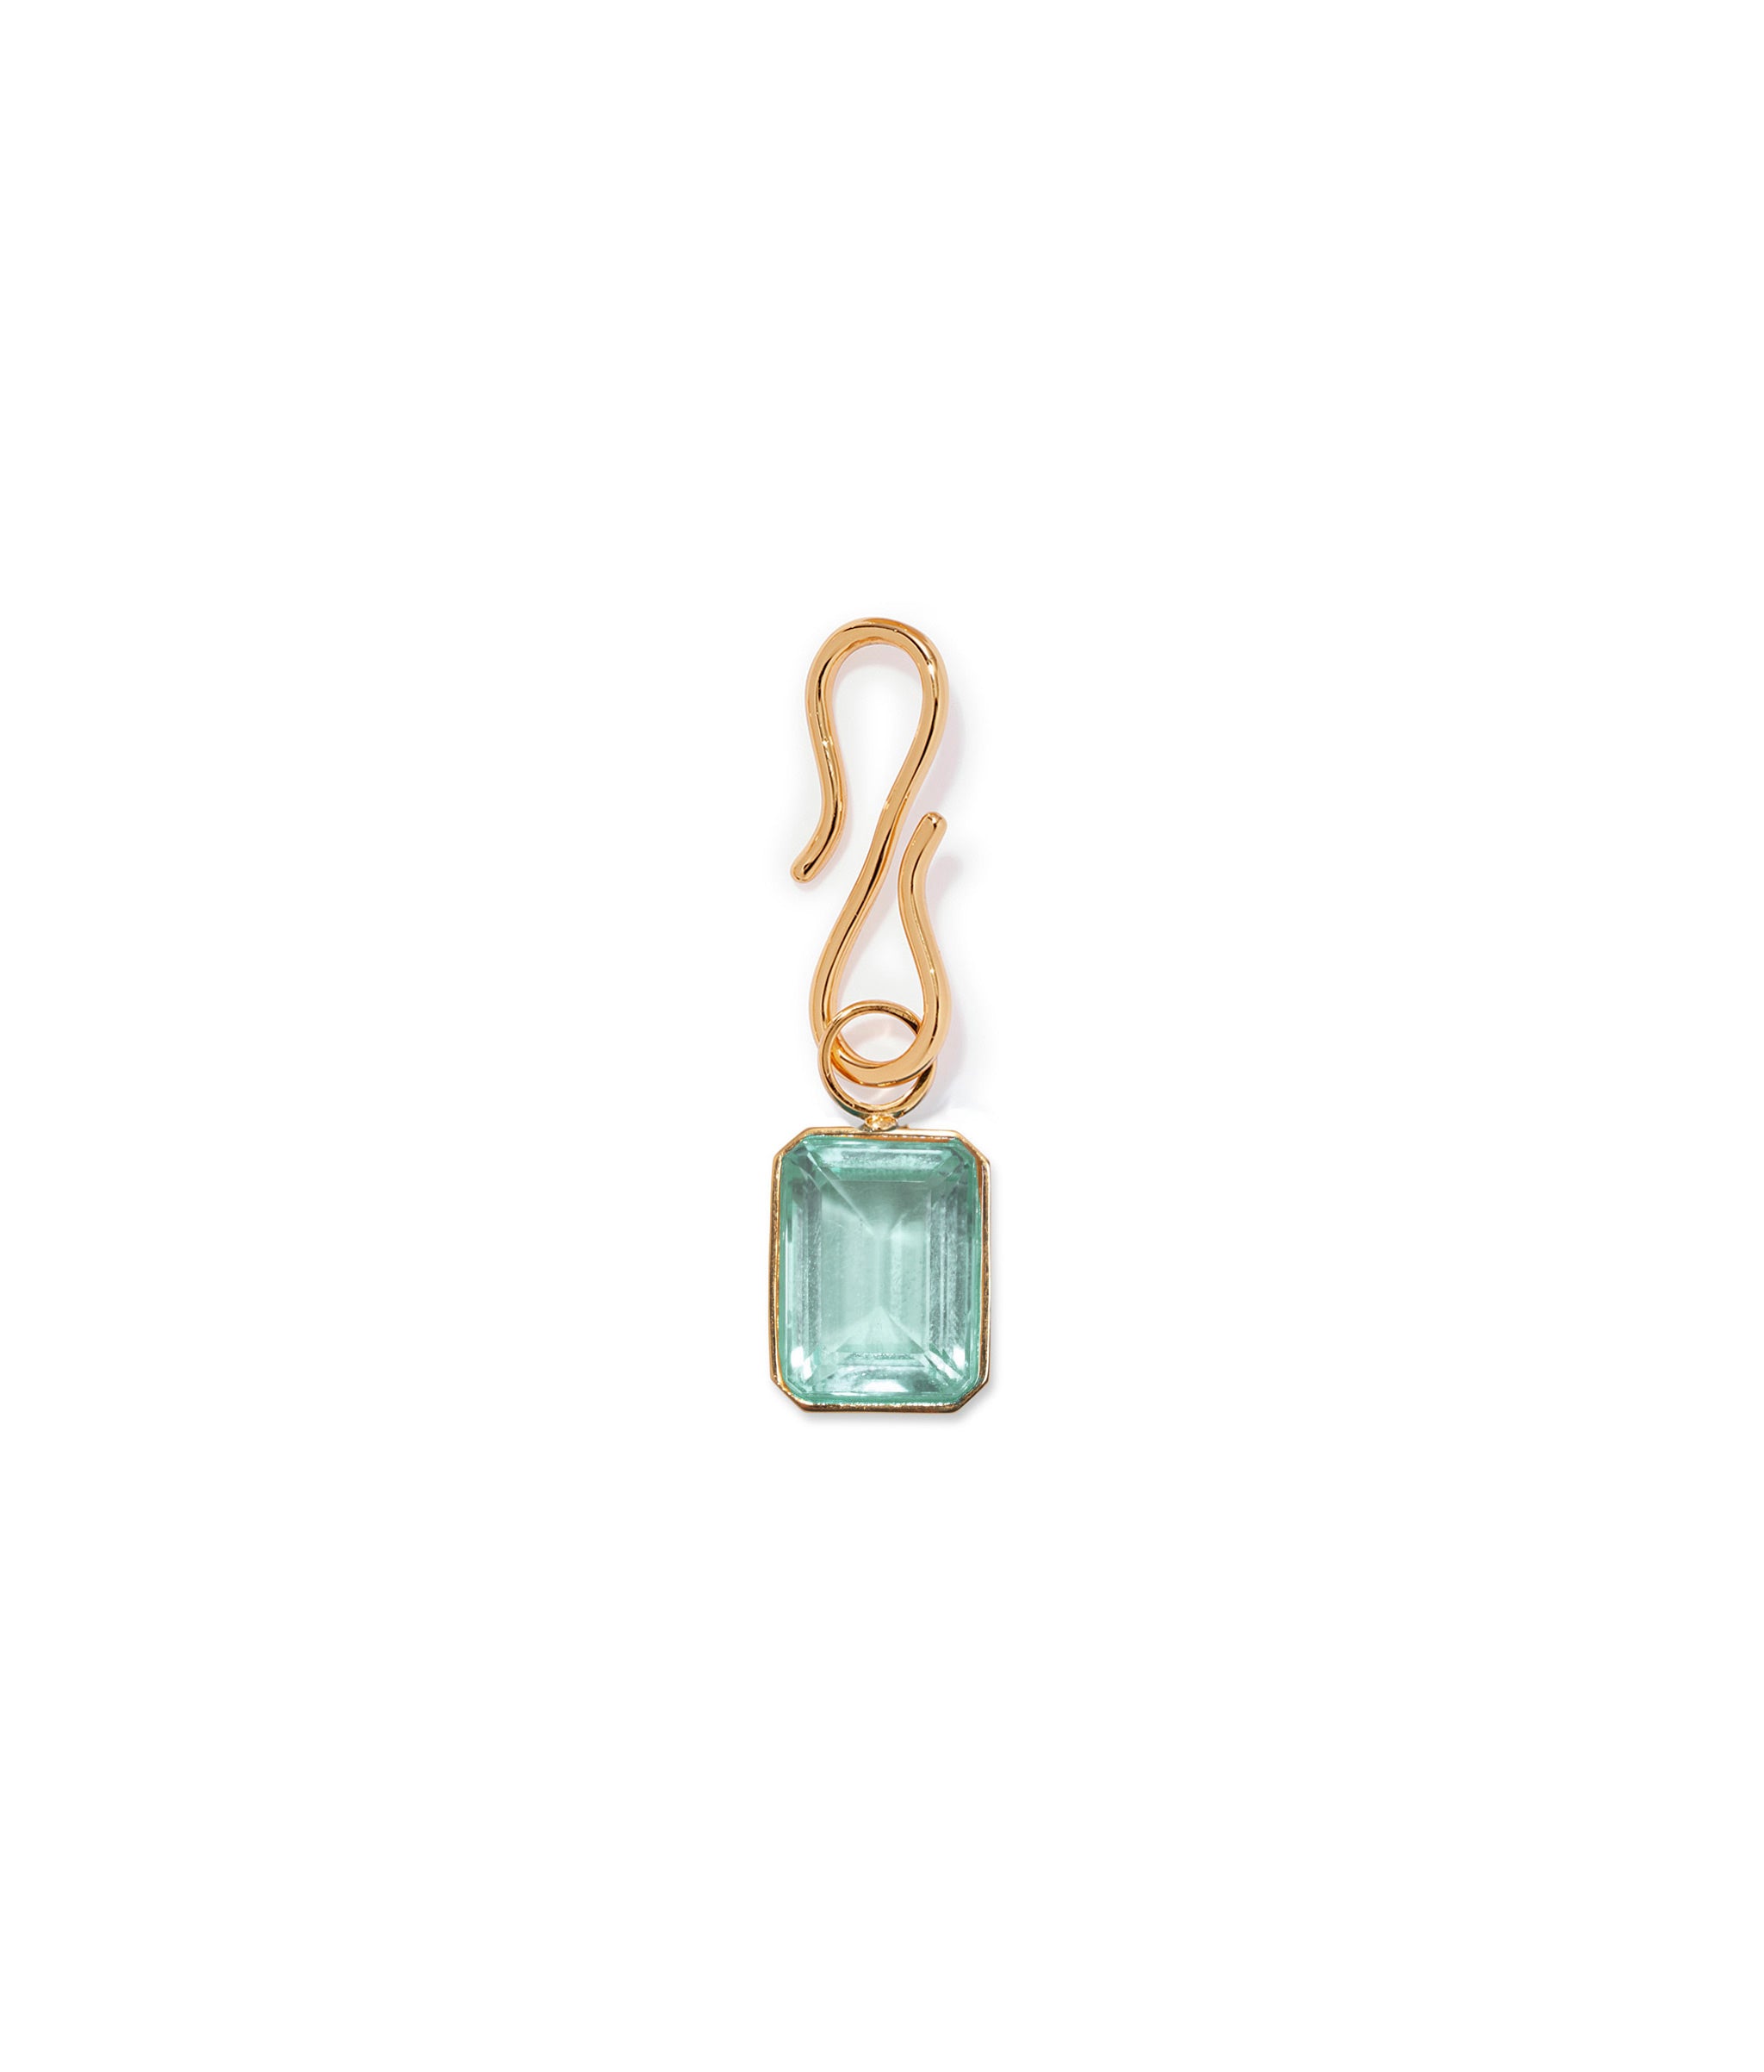 Candyland Charm in Aquamarine. Gold-plated s-hook with rectangular faceted light aqua crystal charm.